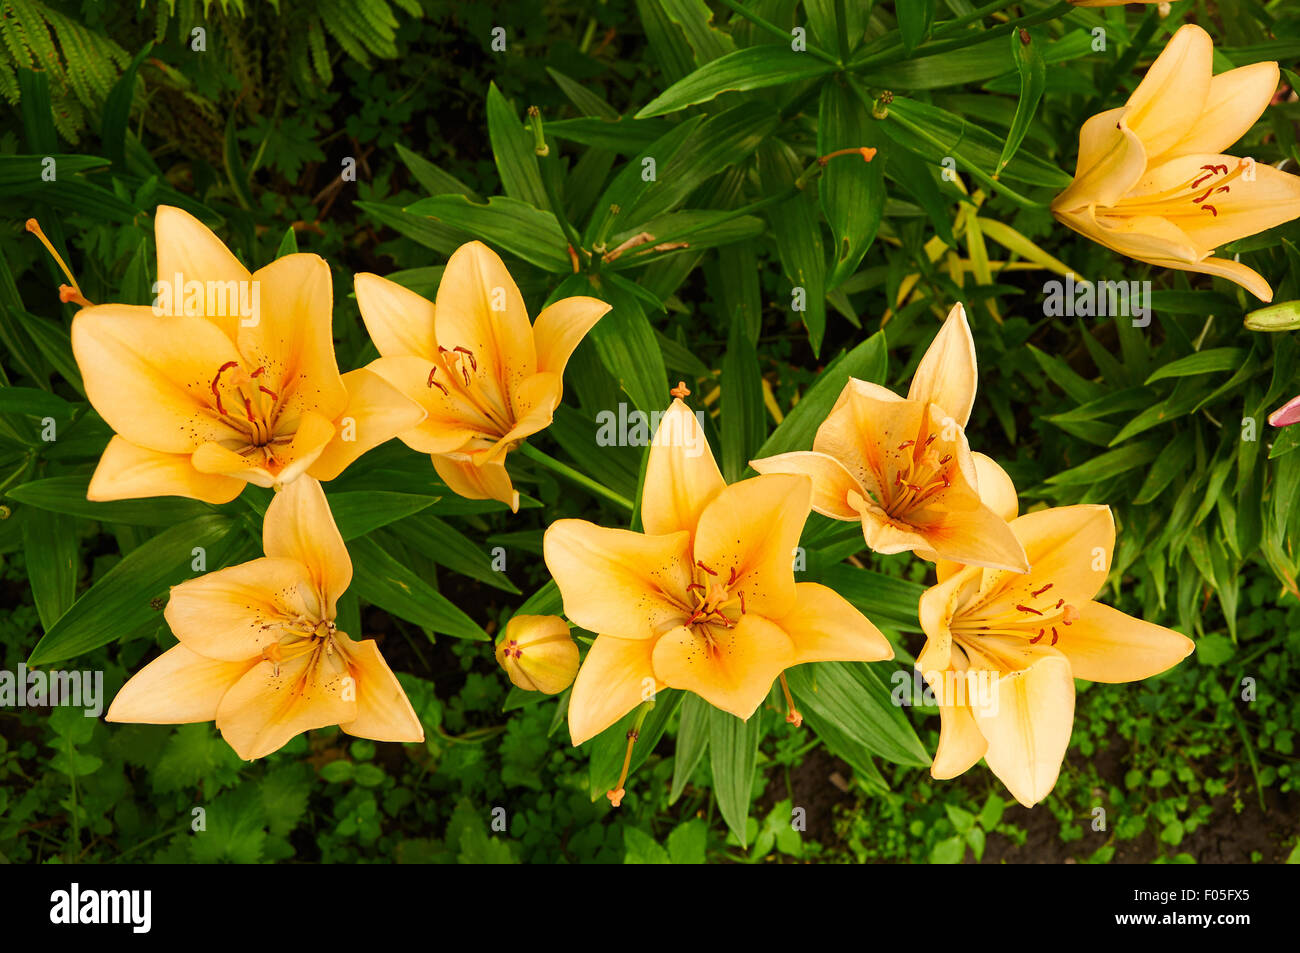 Bright yellow bush of fragile lily flowers in the garden Stock Photo